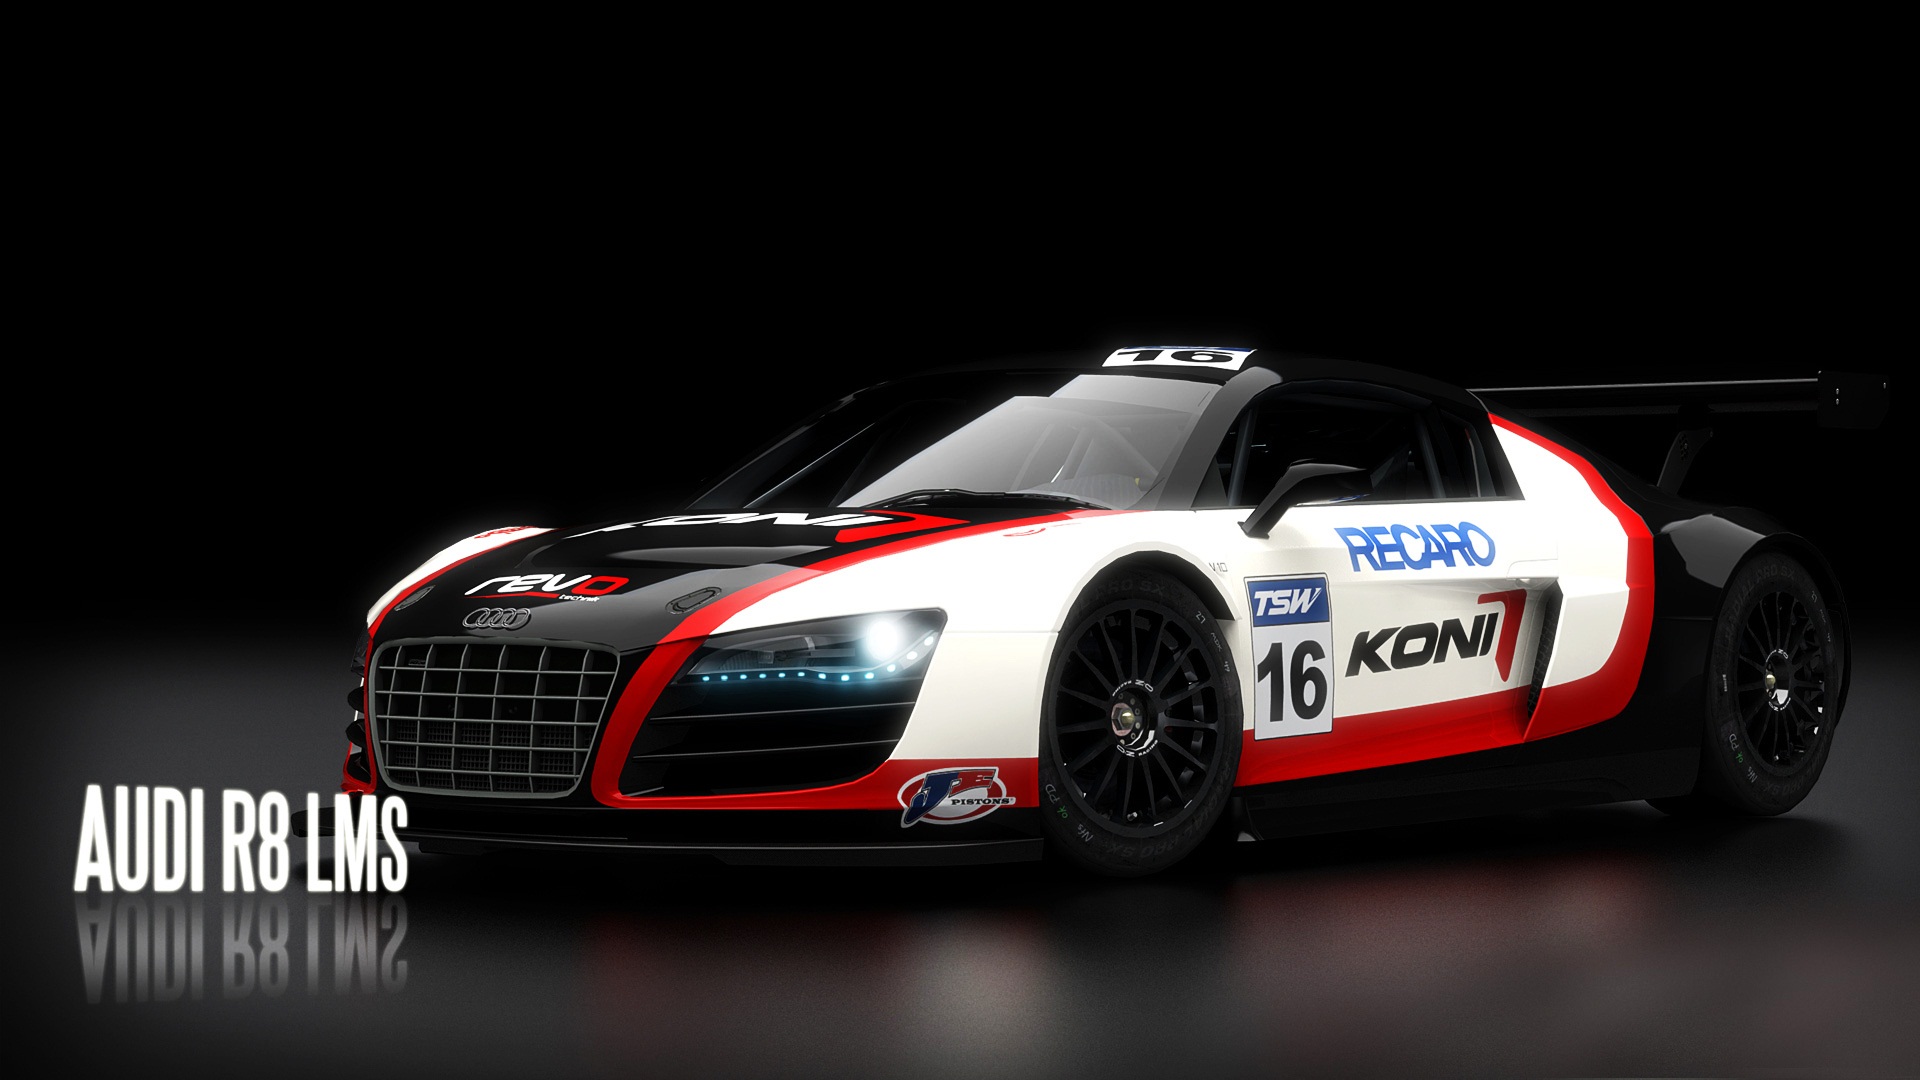 AUDI R8 LMS Wallpapers HD Wallpapers 1920x1080